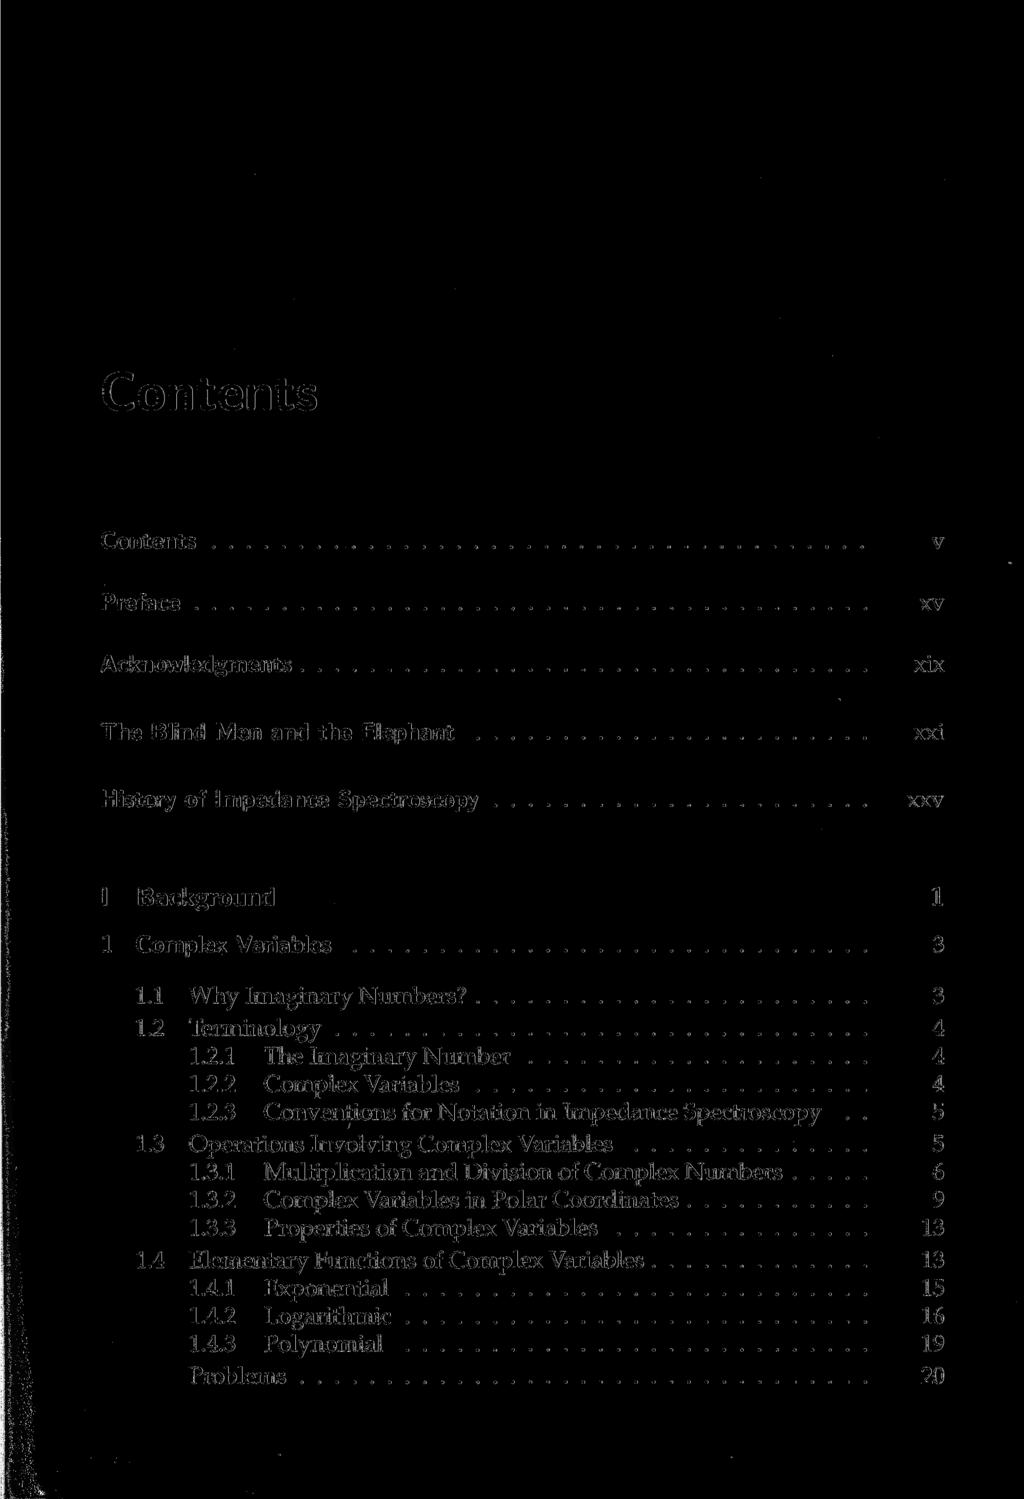 Contents Contents Preface Acknowledgments v xv xix The Blind Men and the Elephant xxi History of Impedance Spectroscopy xxv I Background 1 1 Complex Variables 3 1.1 Why Imaginary Numbers? 3 1.2 Terminology 4 1.